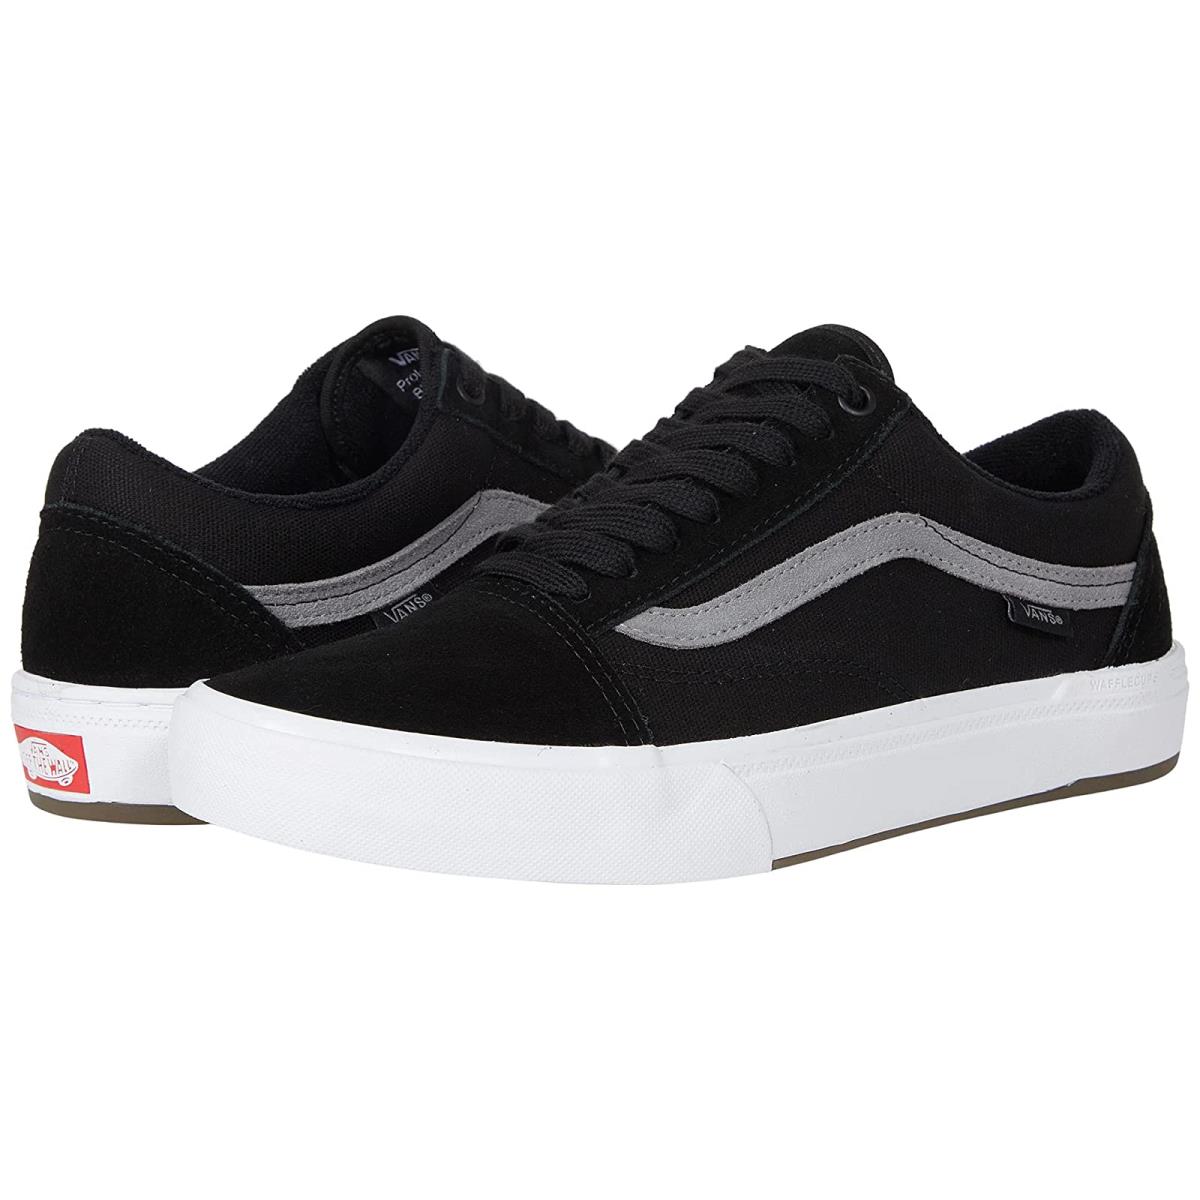 Man`s Sneakers Athletic Shoes Vans Bmx Old Skool Black/Gray/White Leather